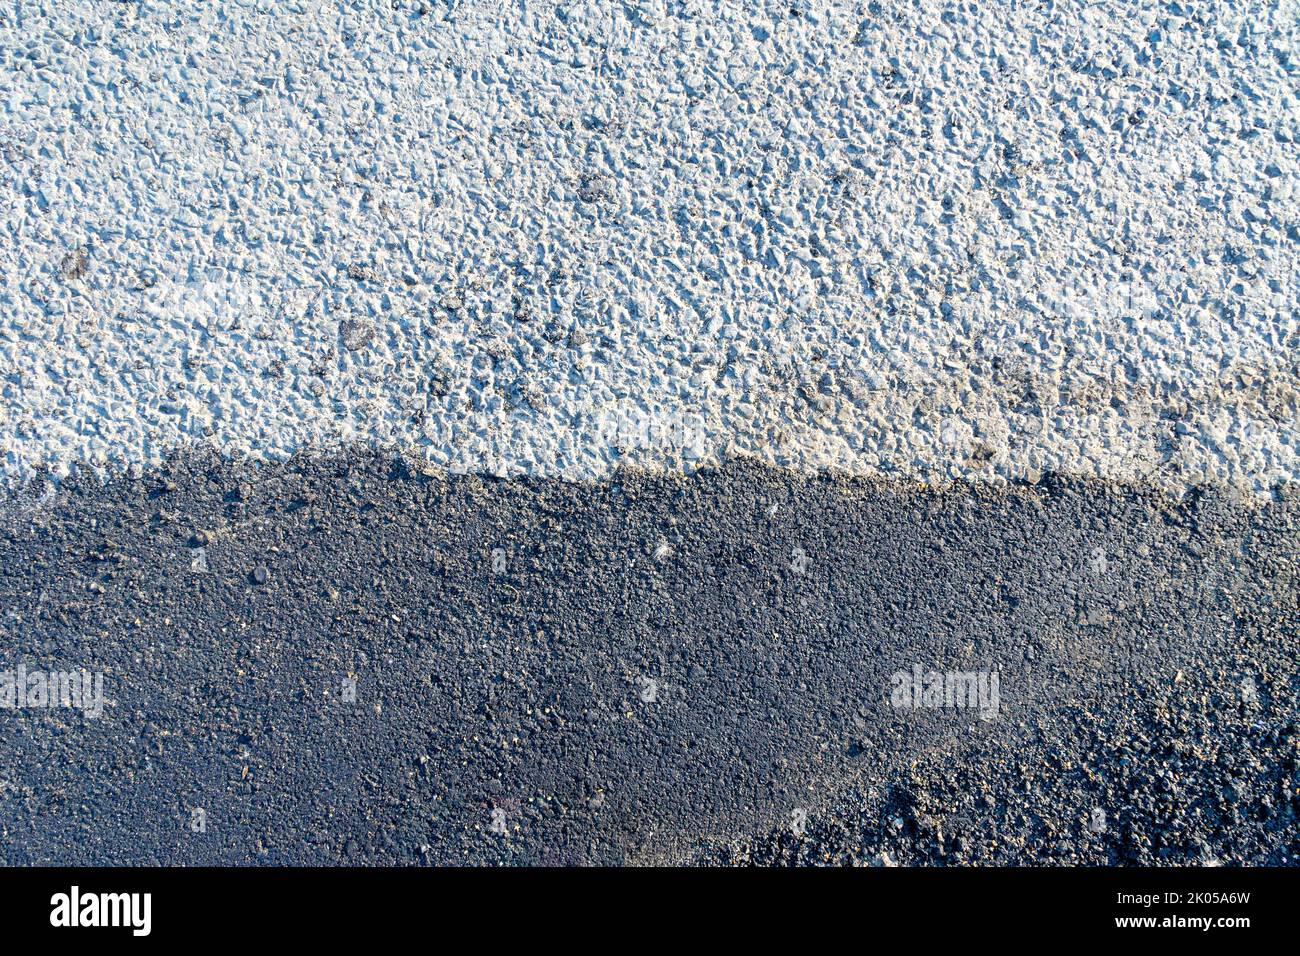 joint of an old coarse asphalt pavement with a newly laid asphalt pavement using a fine stone fraction Stock Photo